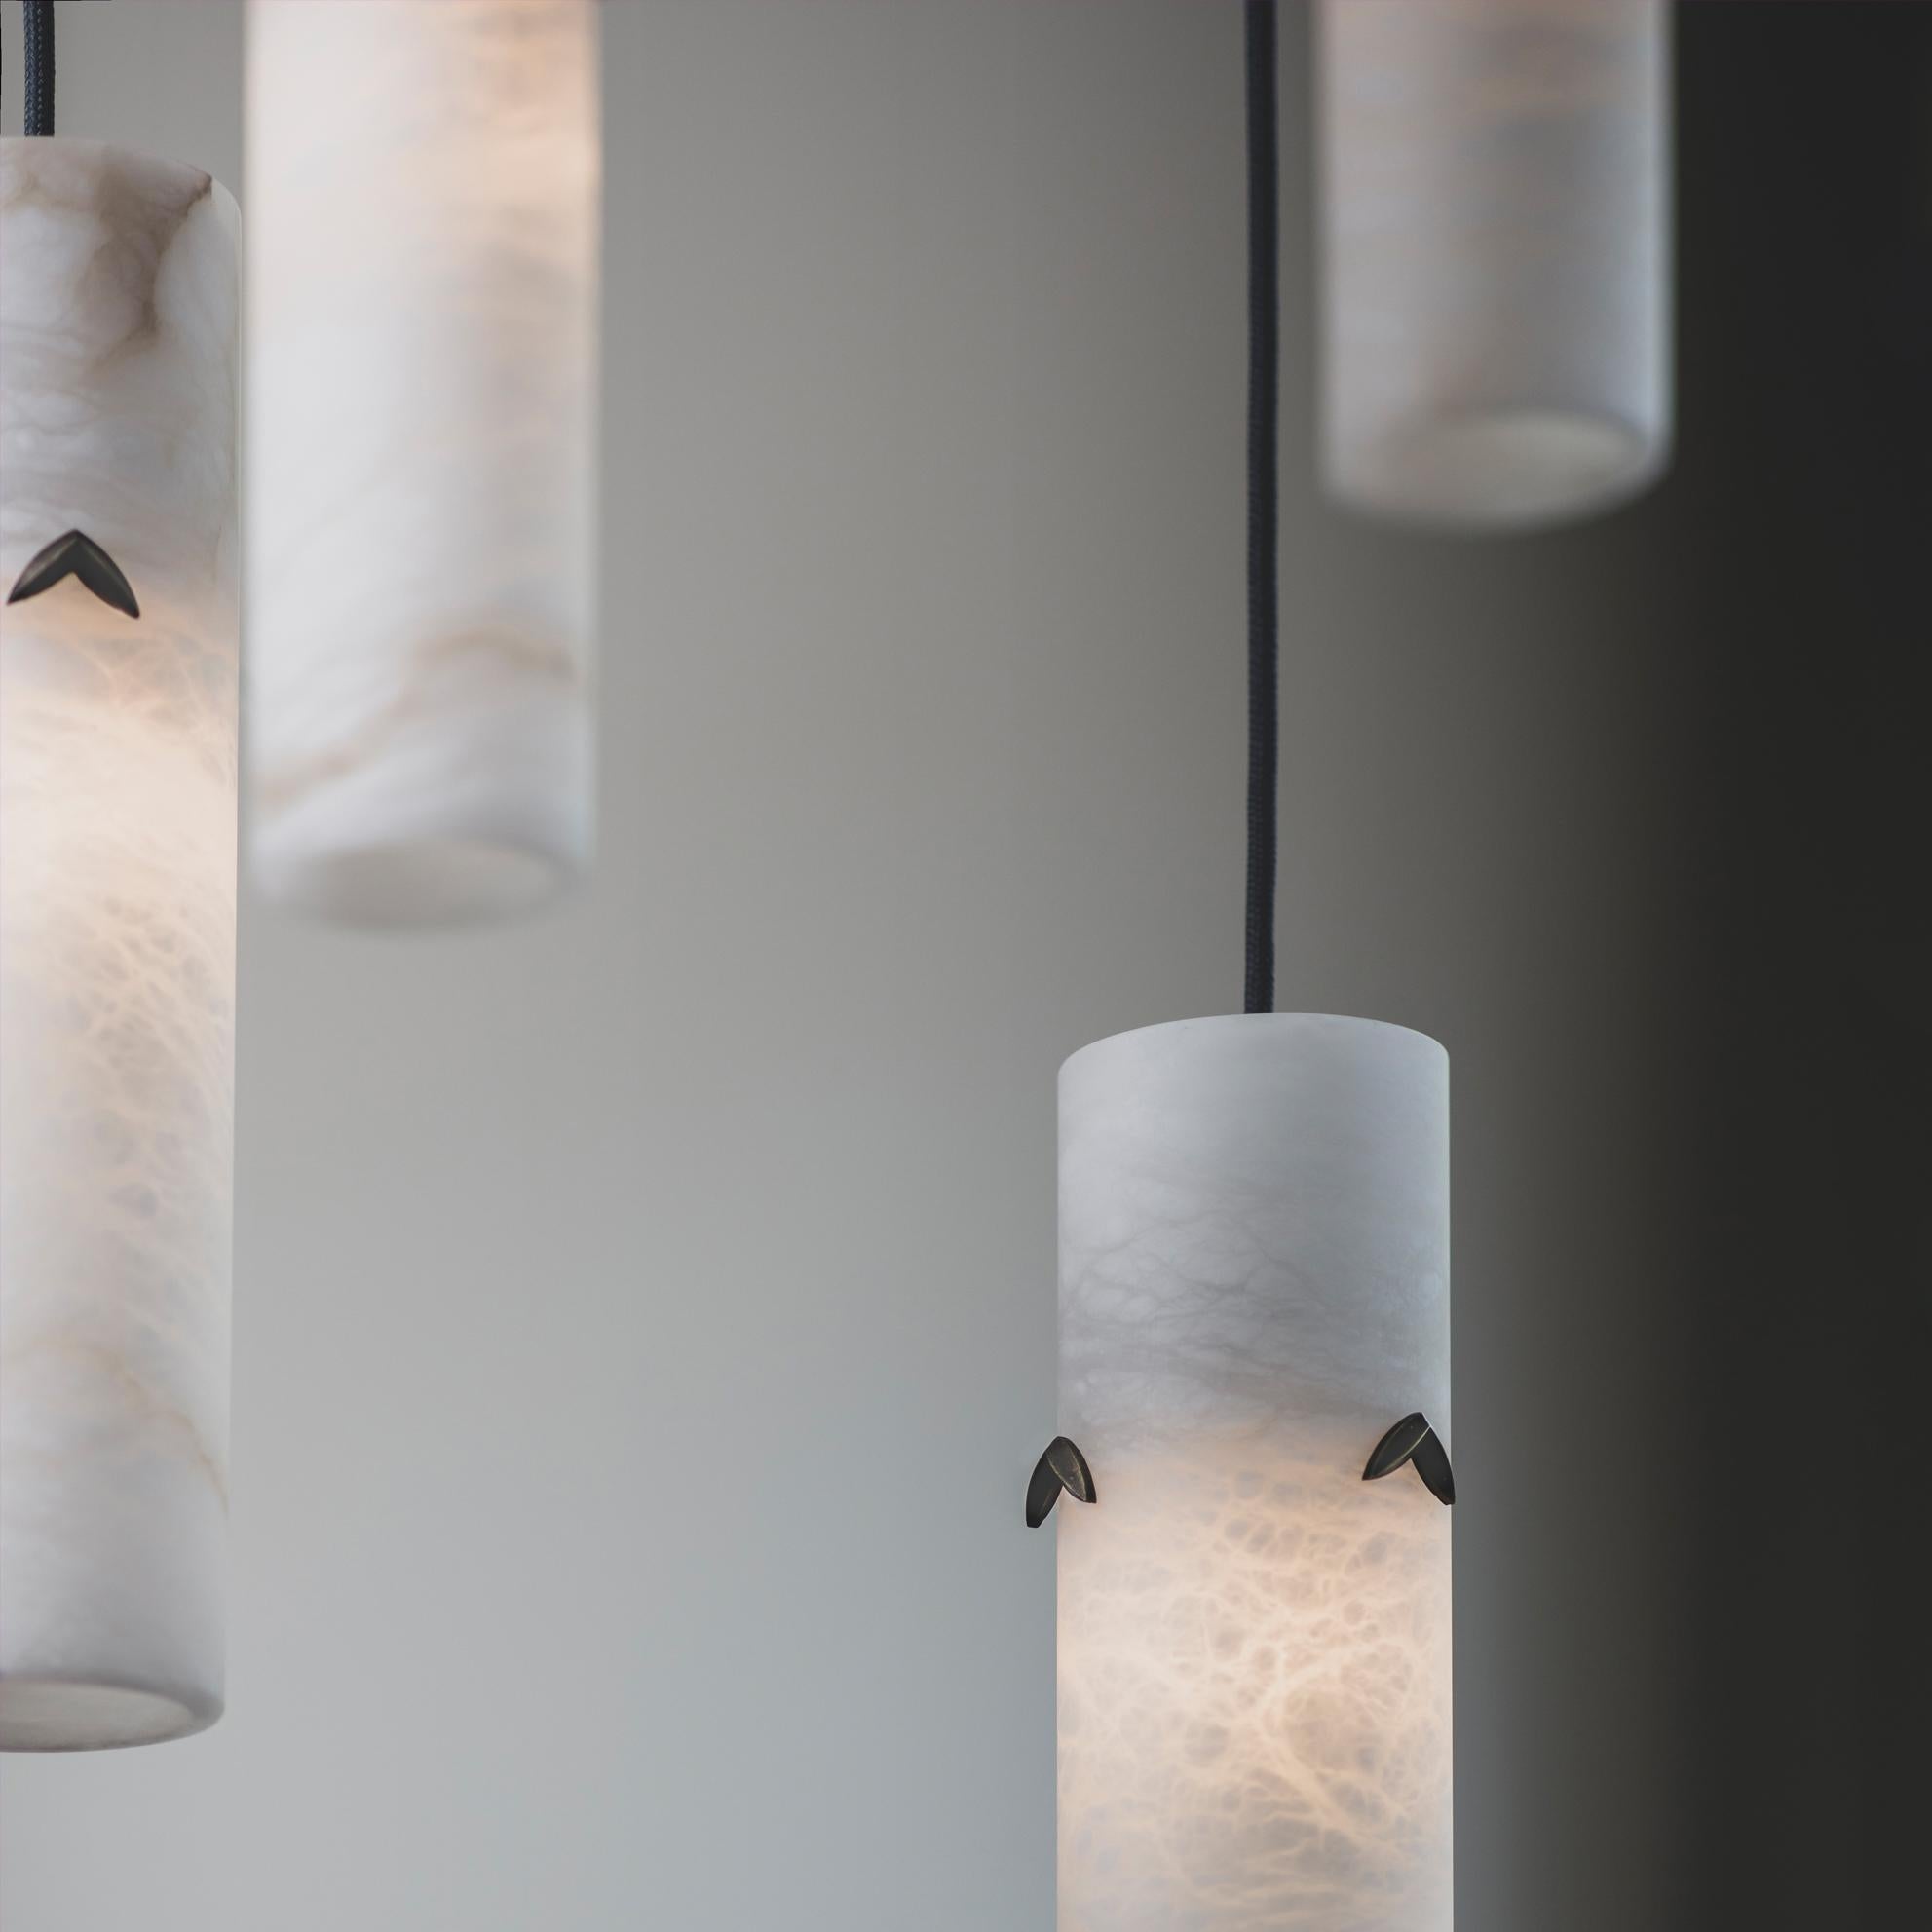 A cluster of pendant lights hewn from solid Alabaster. When lit, the alabaster shade offers a stunning diffuse light and displays a fascinating marbled texture. Each alabaster pendant light shade is adorned with three bronze leaf